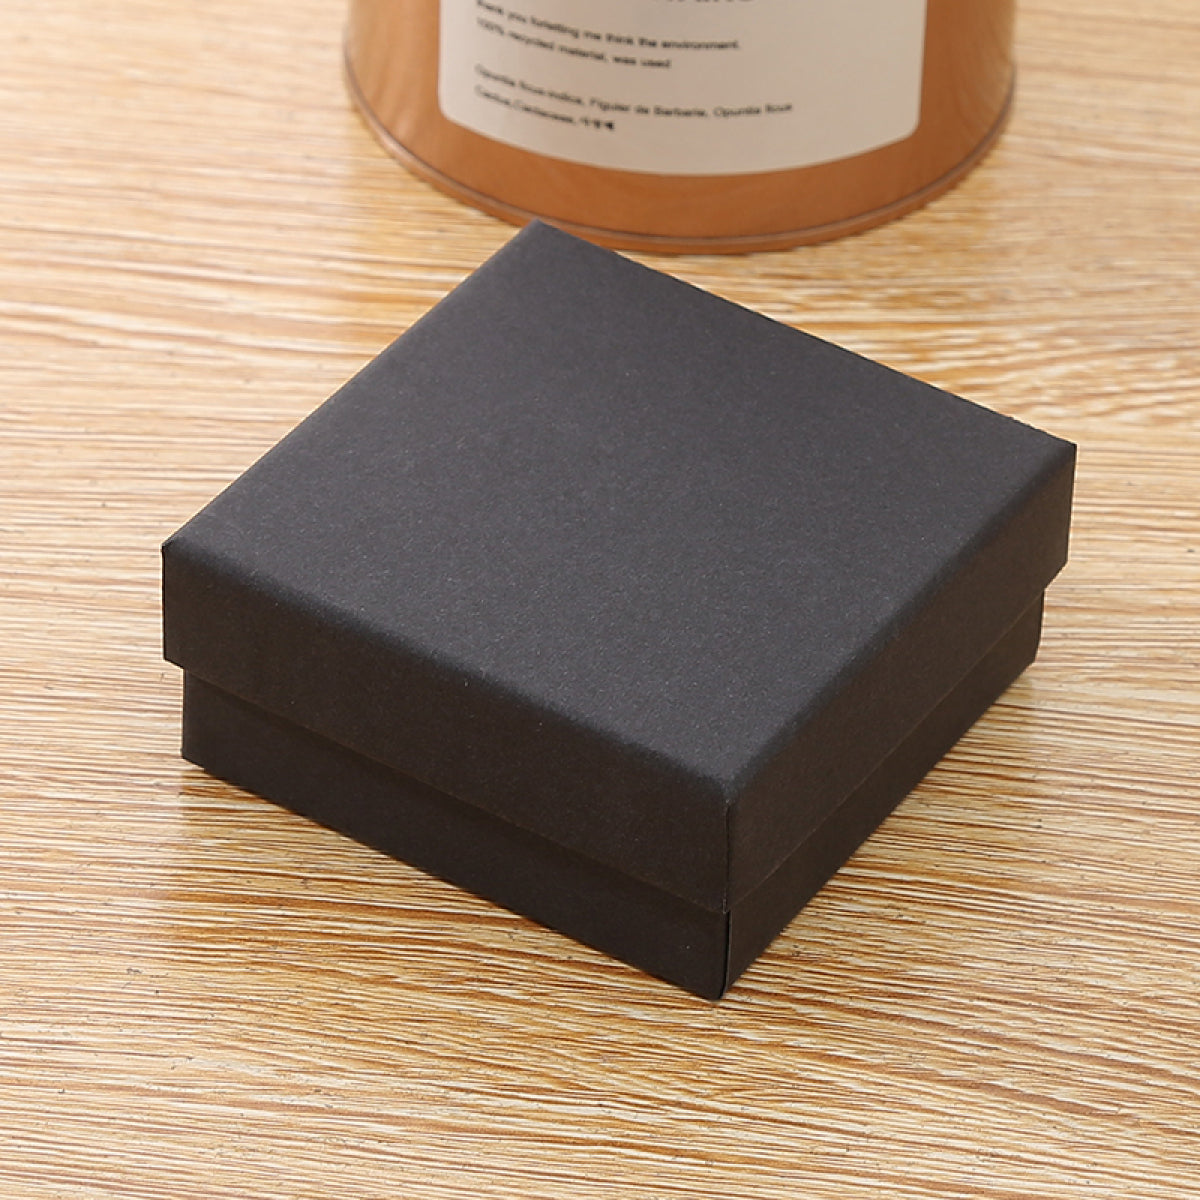 upgrade packaging box (not for individual sales) black box for bracelet (8.5x8.5x5cm)